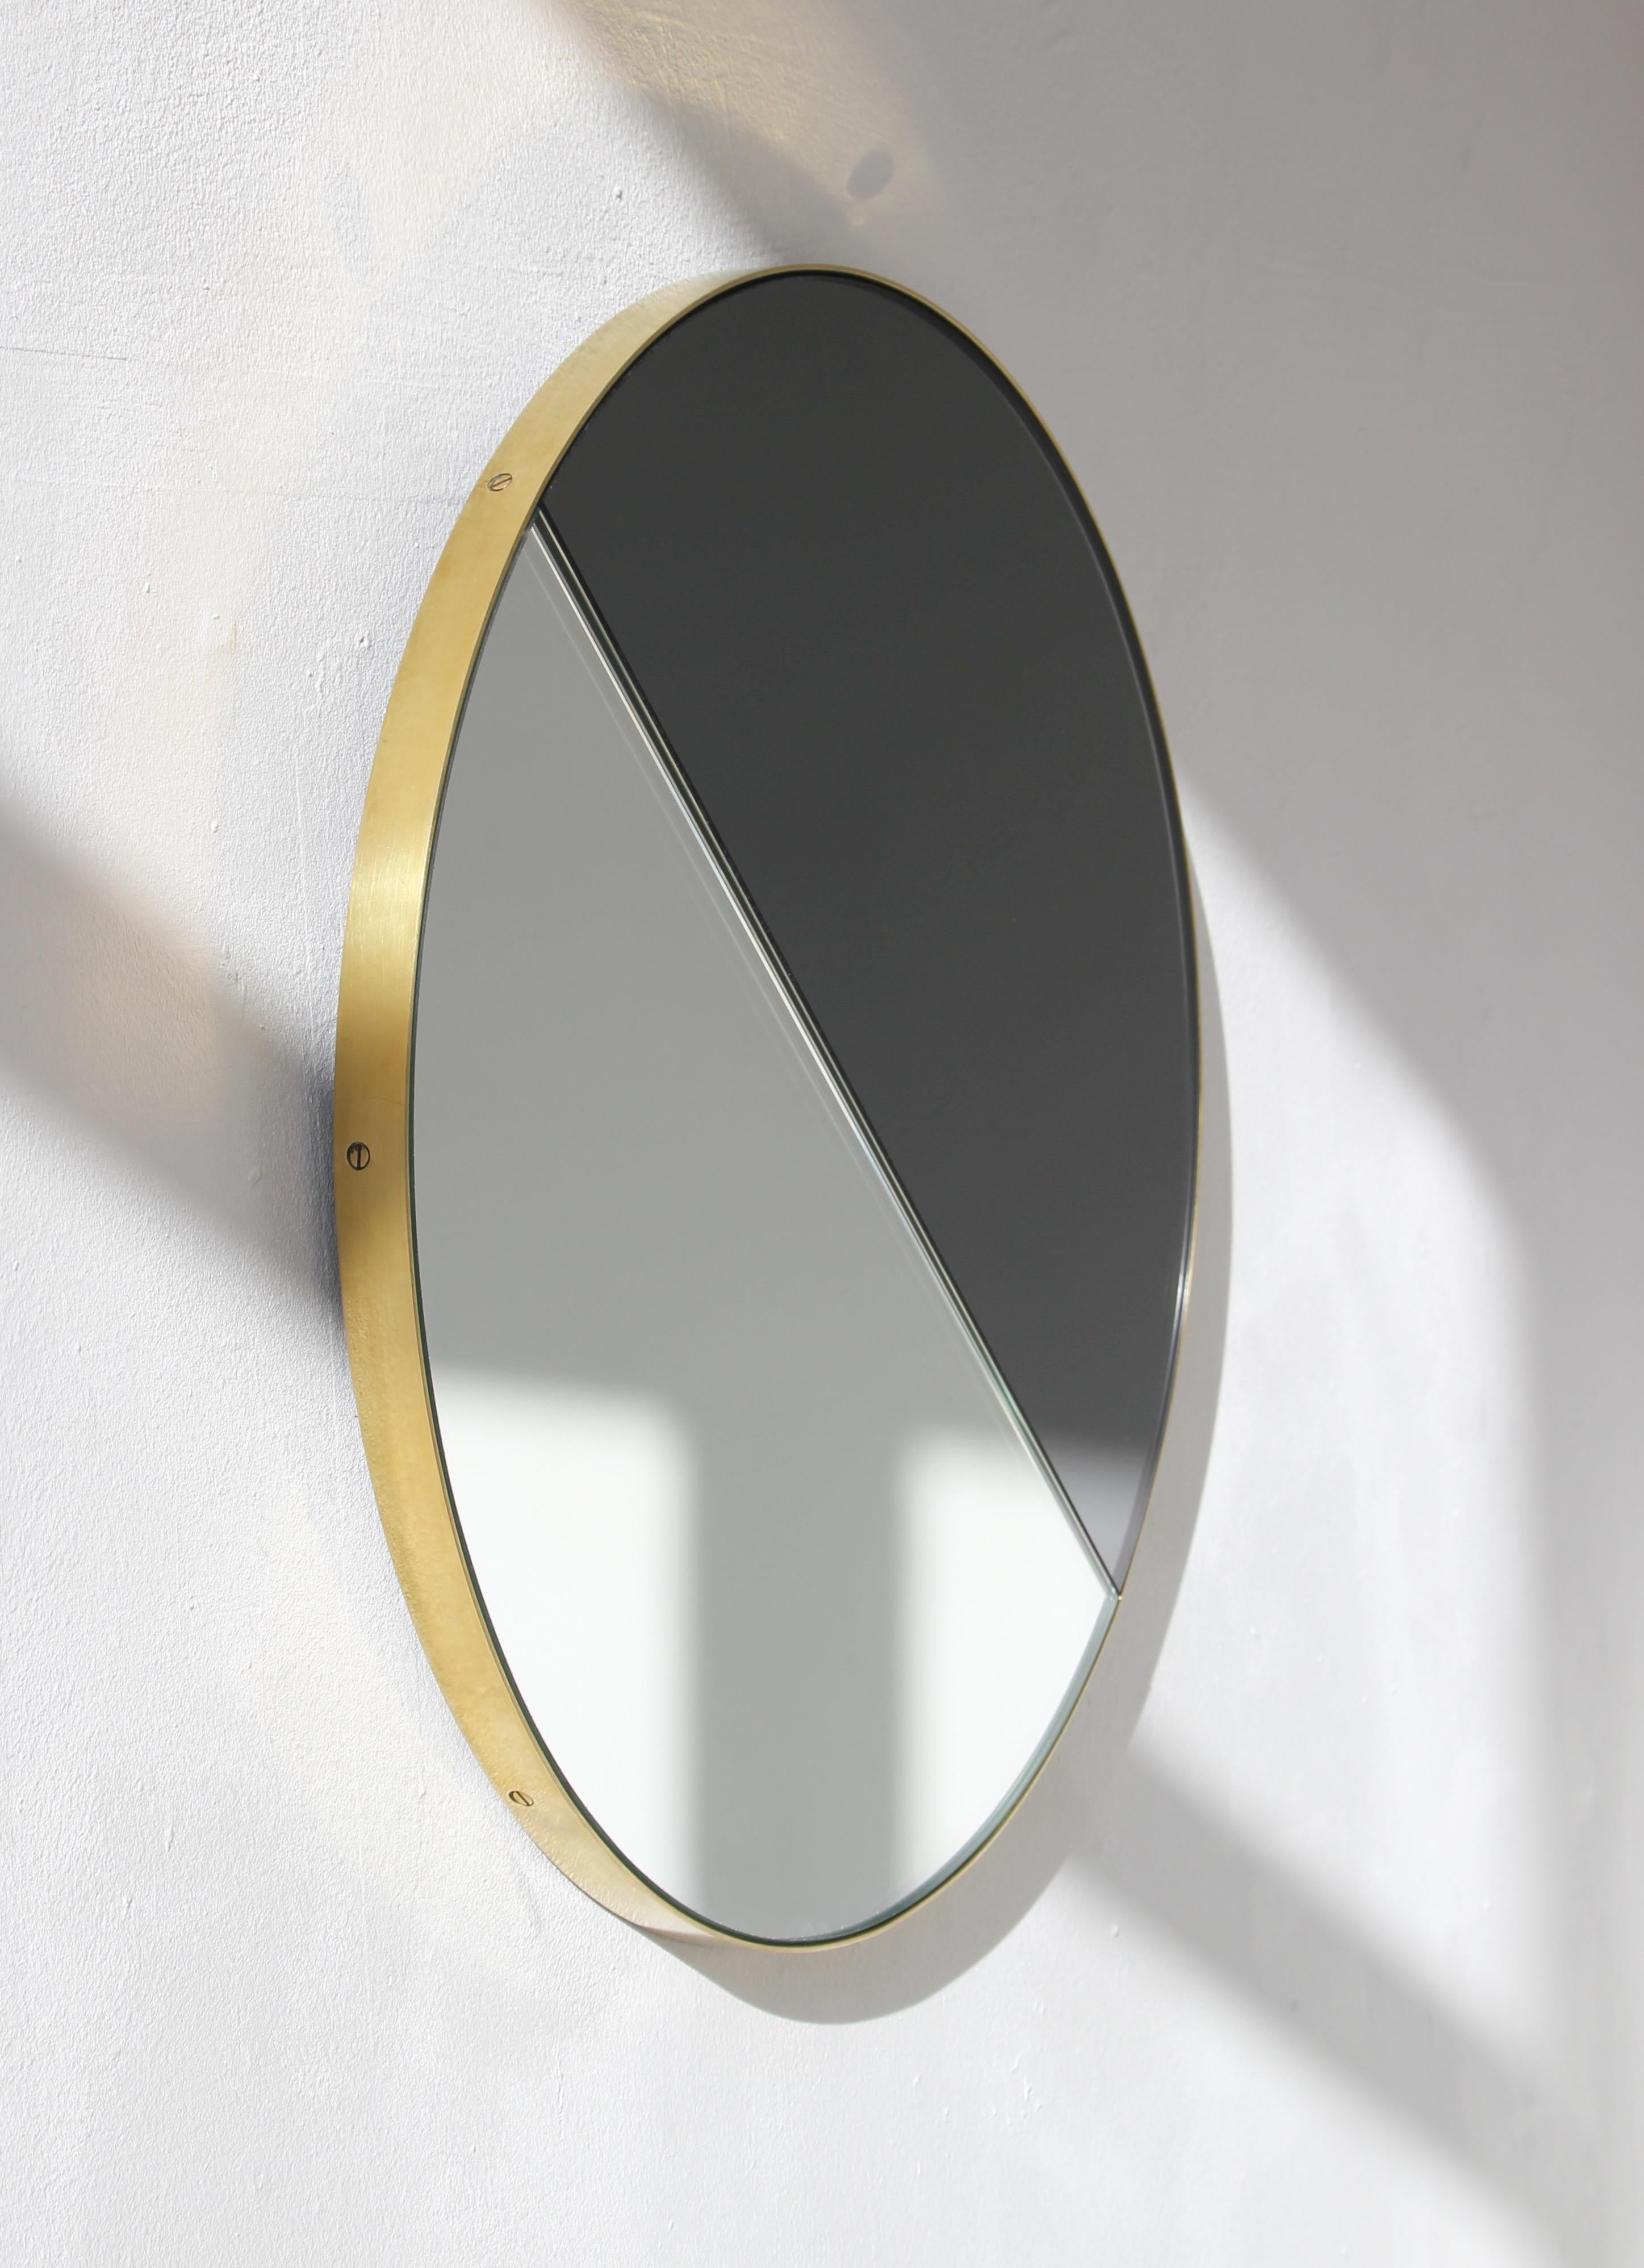 Modern Orbis Dualis Mixed Tint Contemporary Round Mirror with Brass Frame, Medium For Sale